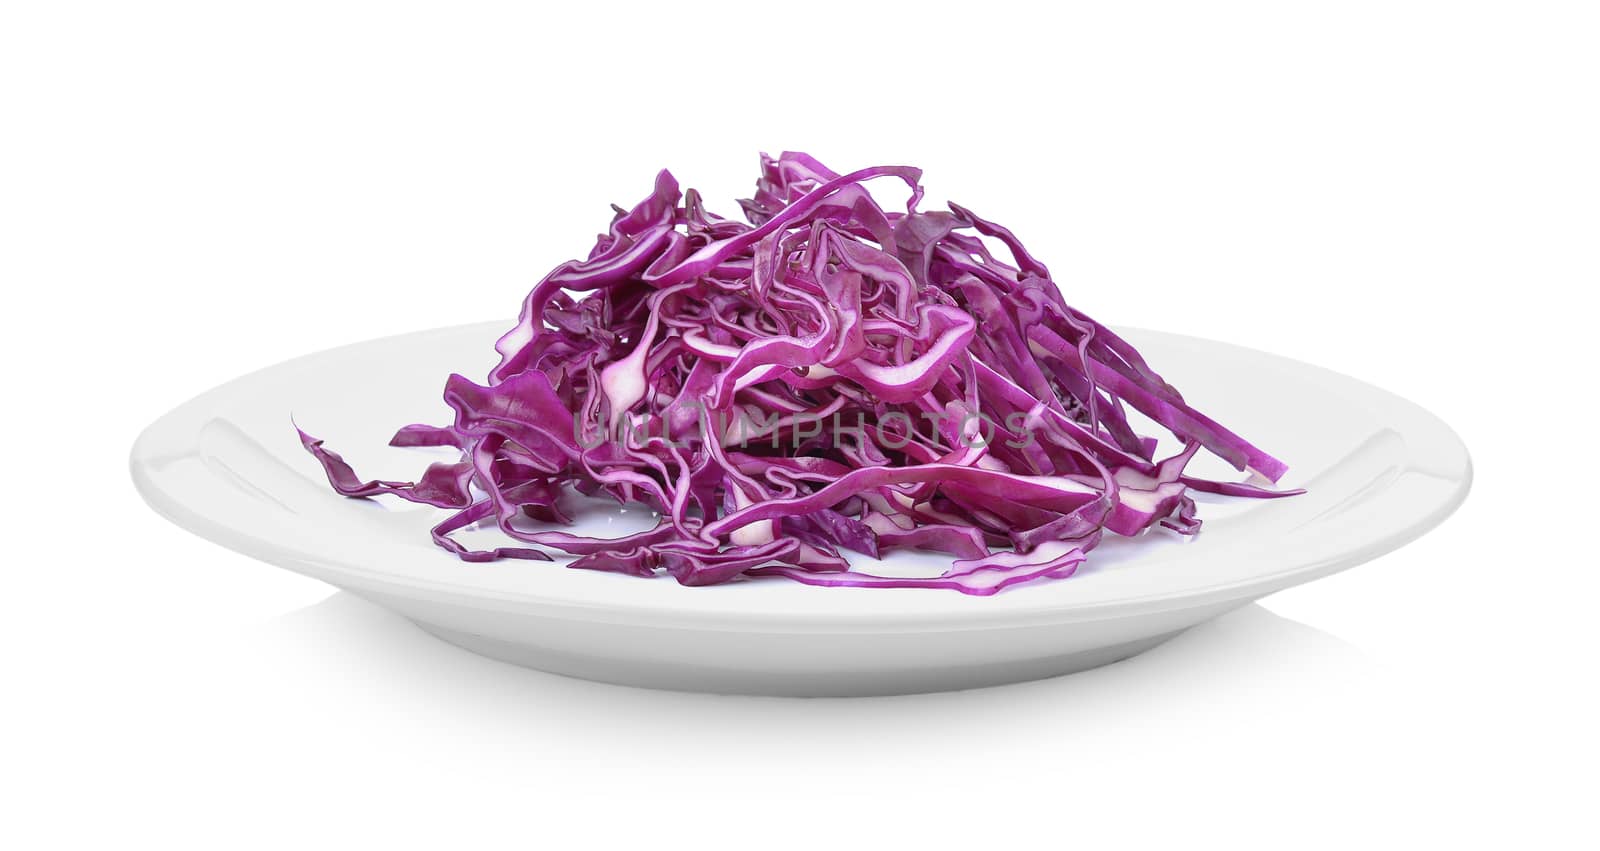 sliced of red cabbage in plate on white background